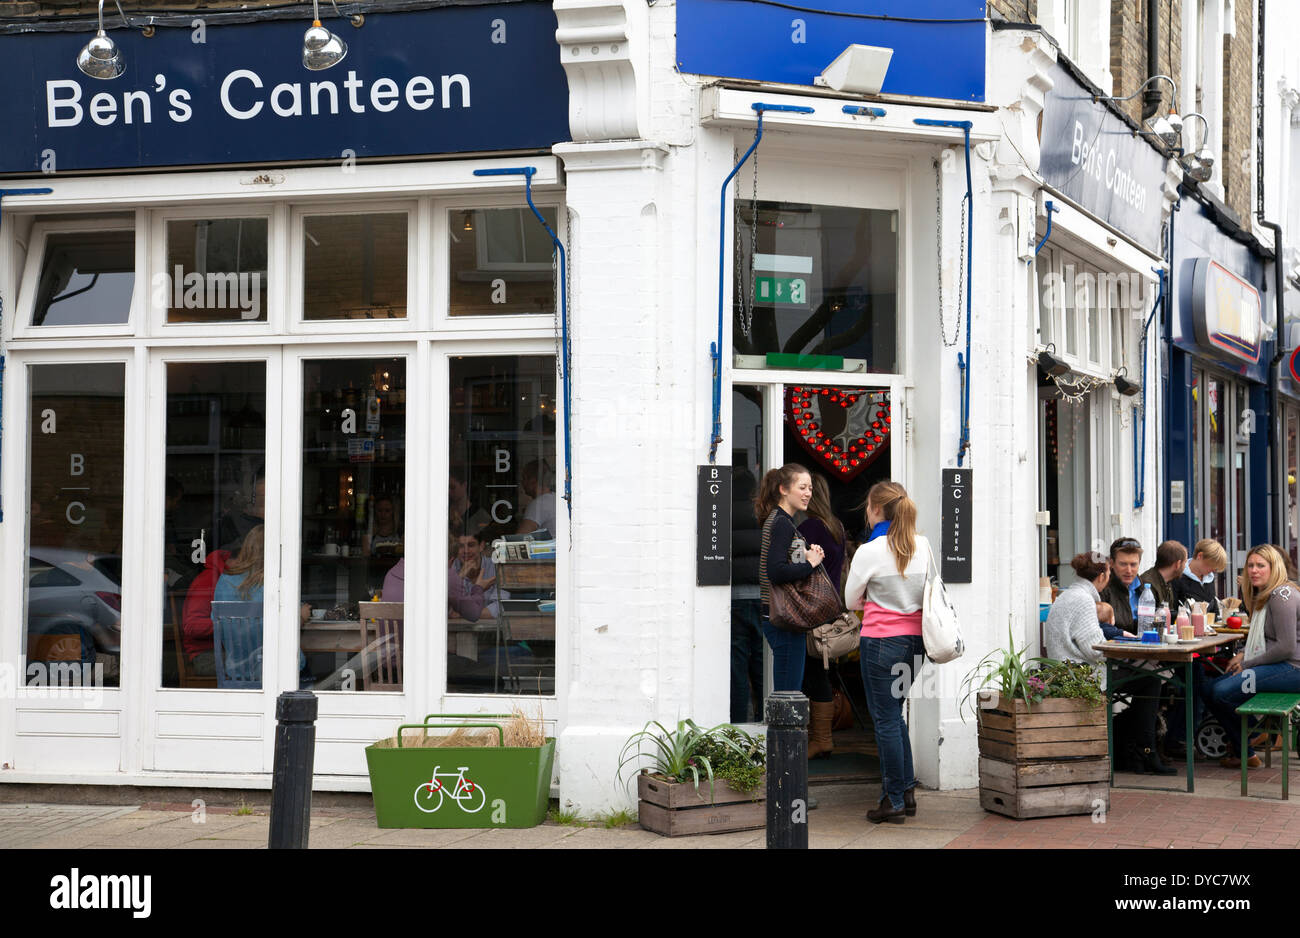 Ben's Canteen on St John's Hill in Wandsworth - London SW11 - UK Stock Photo